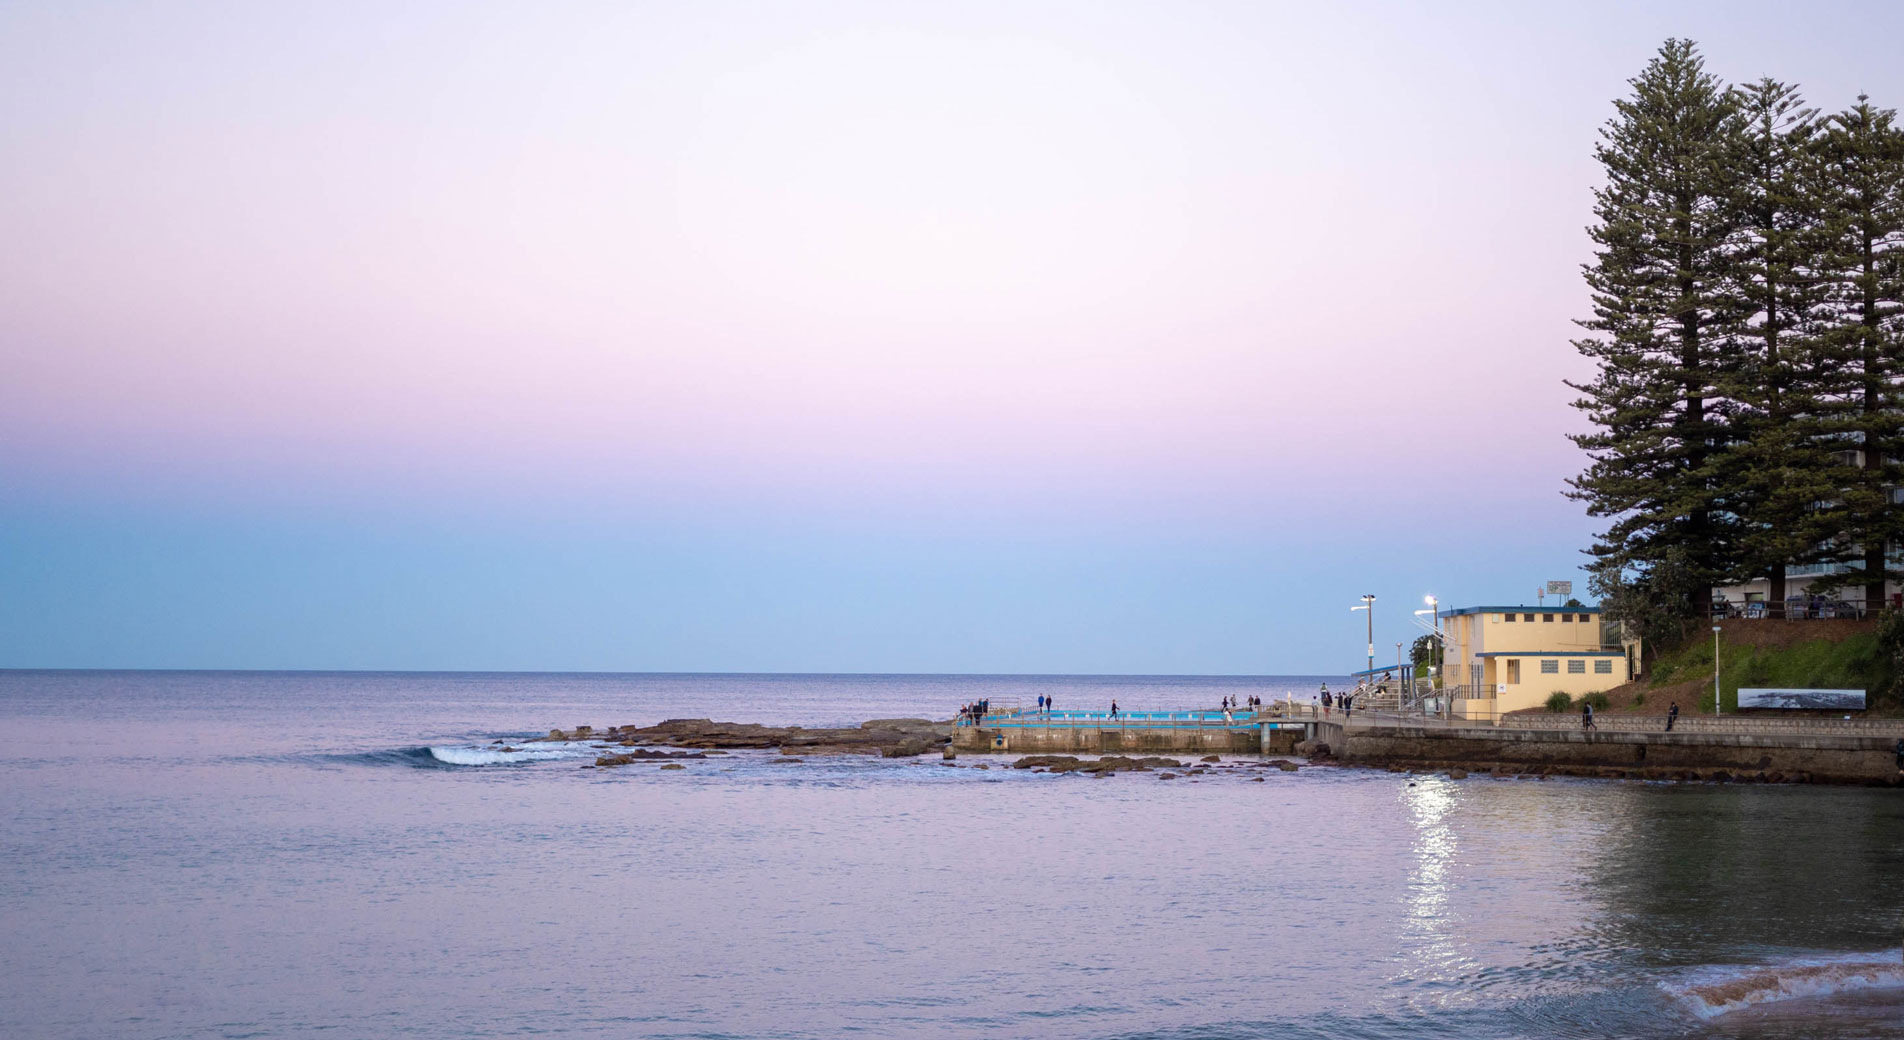 landscape shot of horizon at dee why beach, sydney's northern beaches. sky is a purply pink at sunset, flat water reflects this. people stand round lap pool jutting out from rocks, pine trees appear in corner of picture.